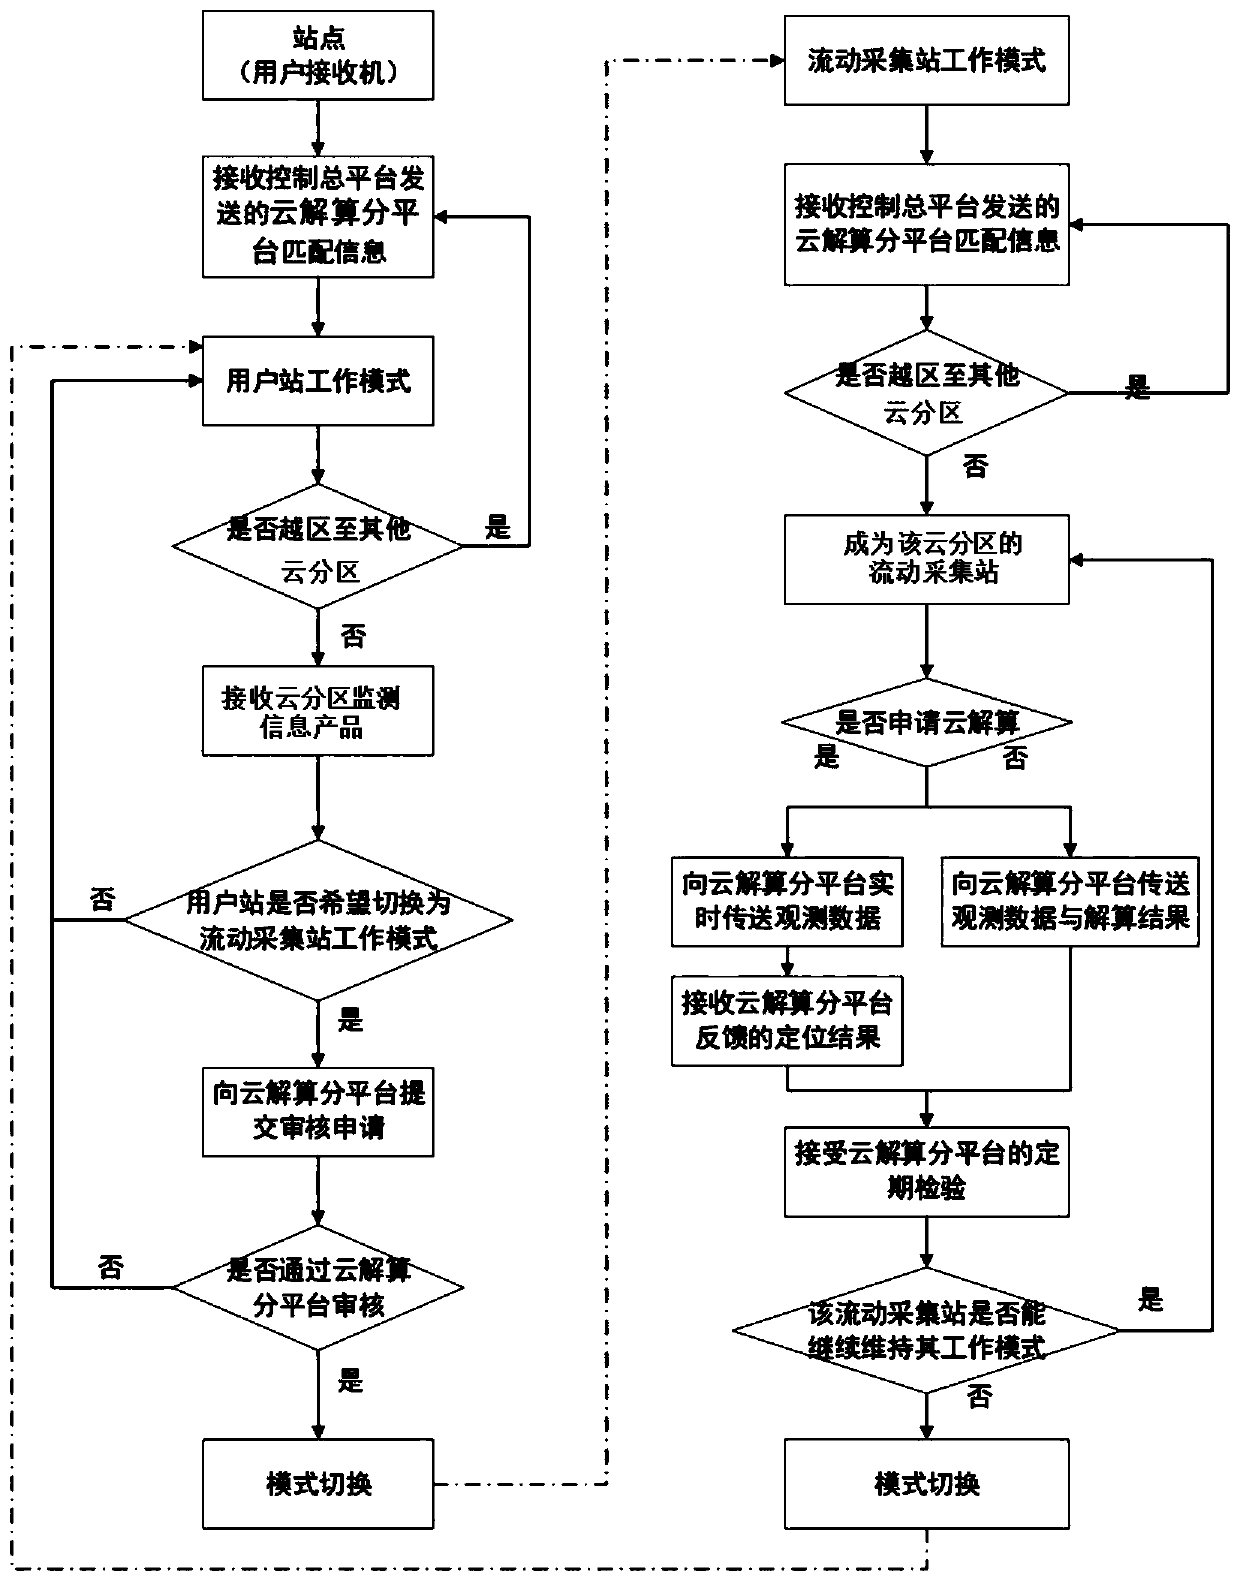 Low-power-consumption satellite navigation mobile acquisition system and method in cross-region scene